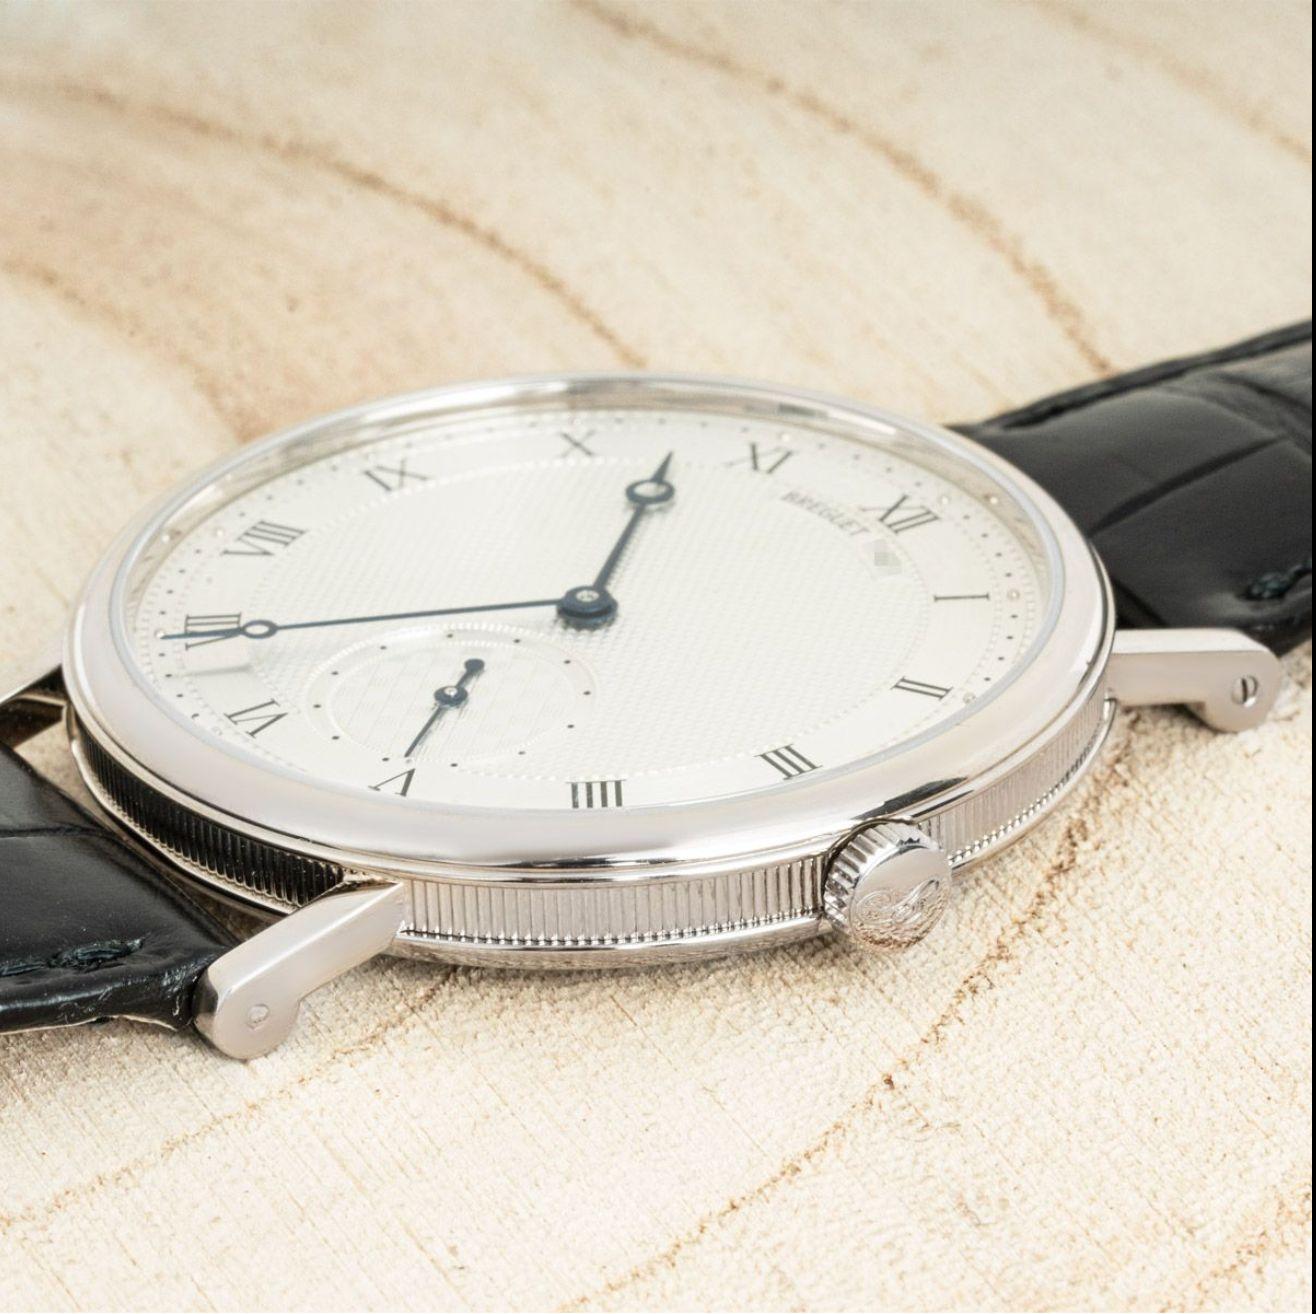 A Breguet Classique wristwatch crafted in white gold. Featuring a silvered dial with a textured guilloche pattern, a small seconds sub-dial and a white gold bezel.

Equipped with a Beguet black leather strap and a white gold pin buckle. The watch is